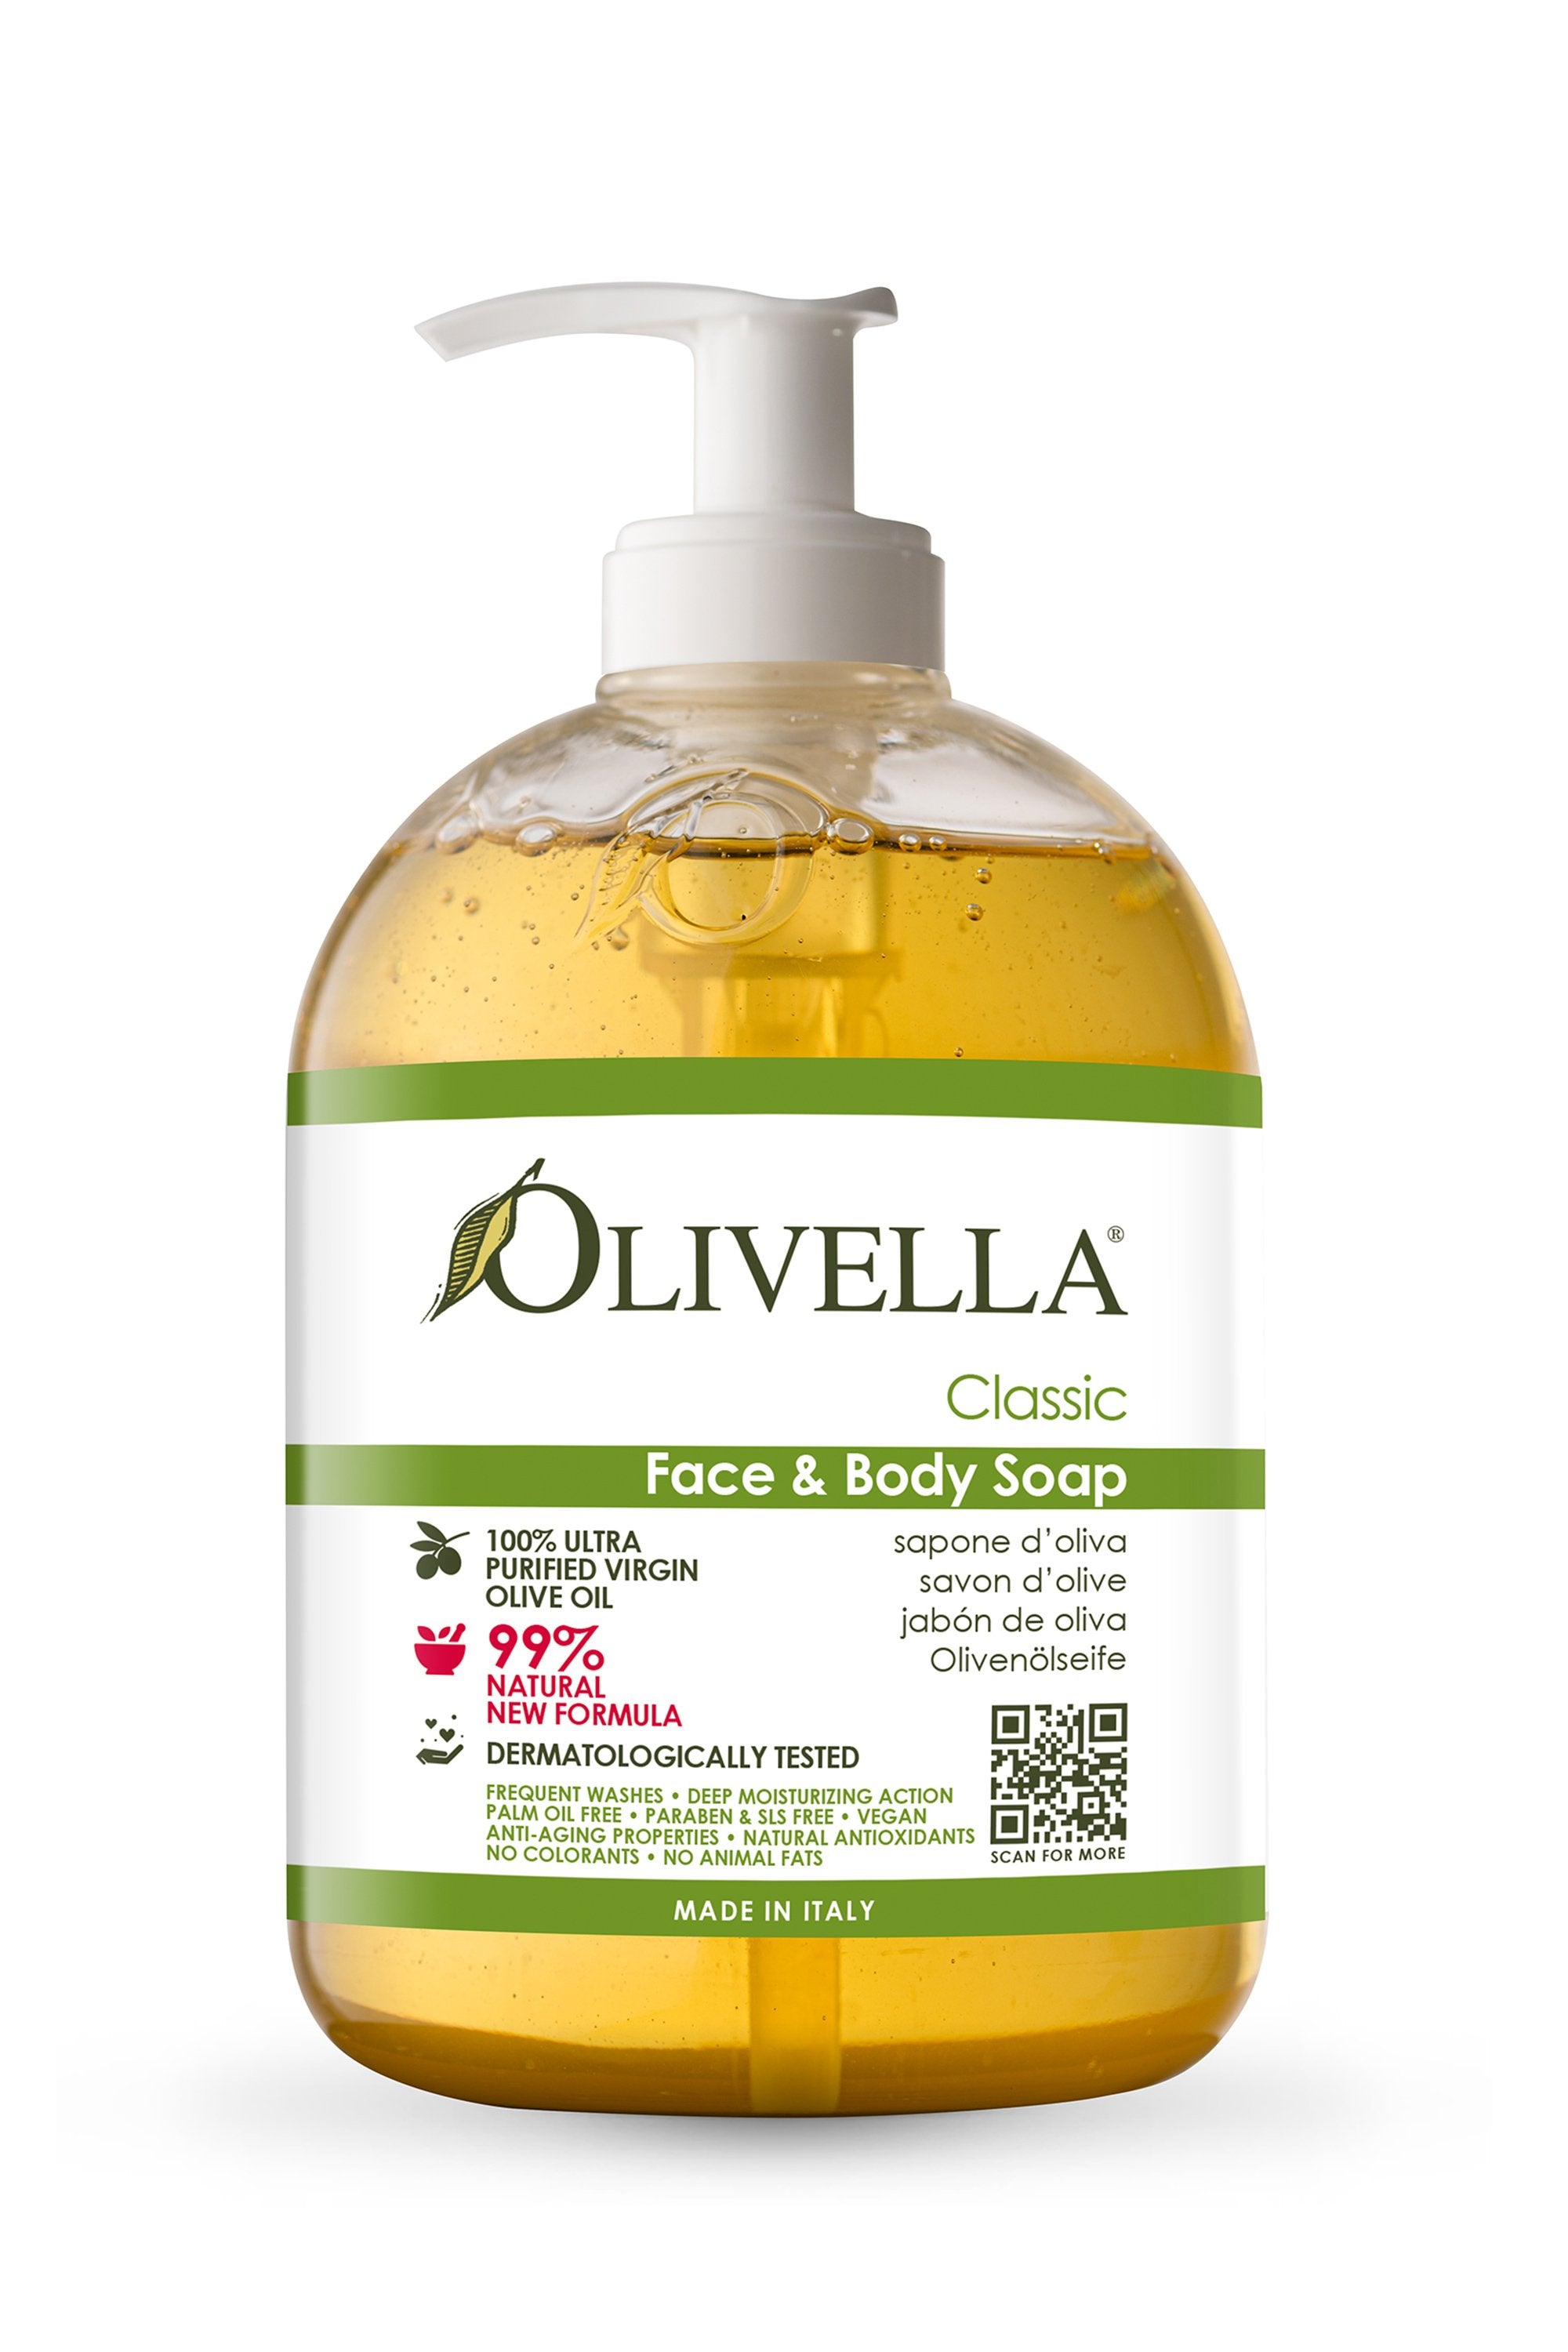 Olivella Soap - Face & Body Soap from Olive